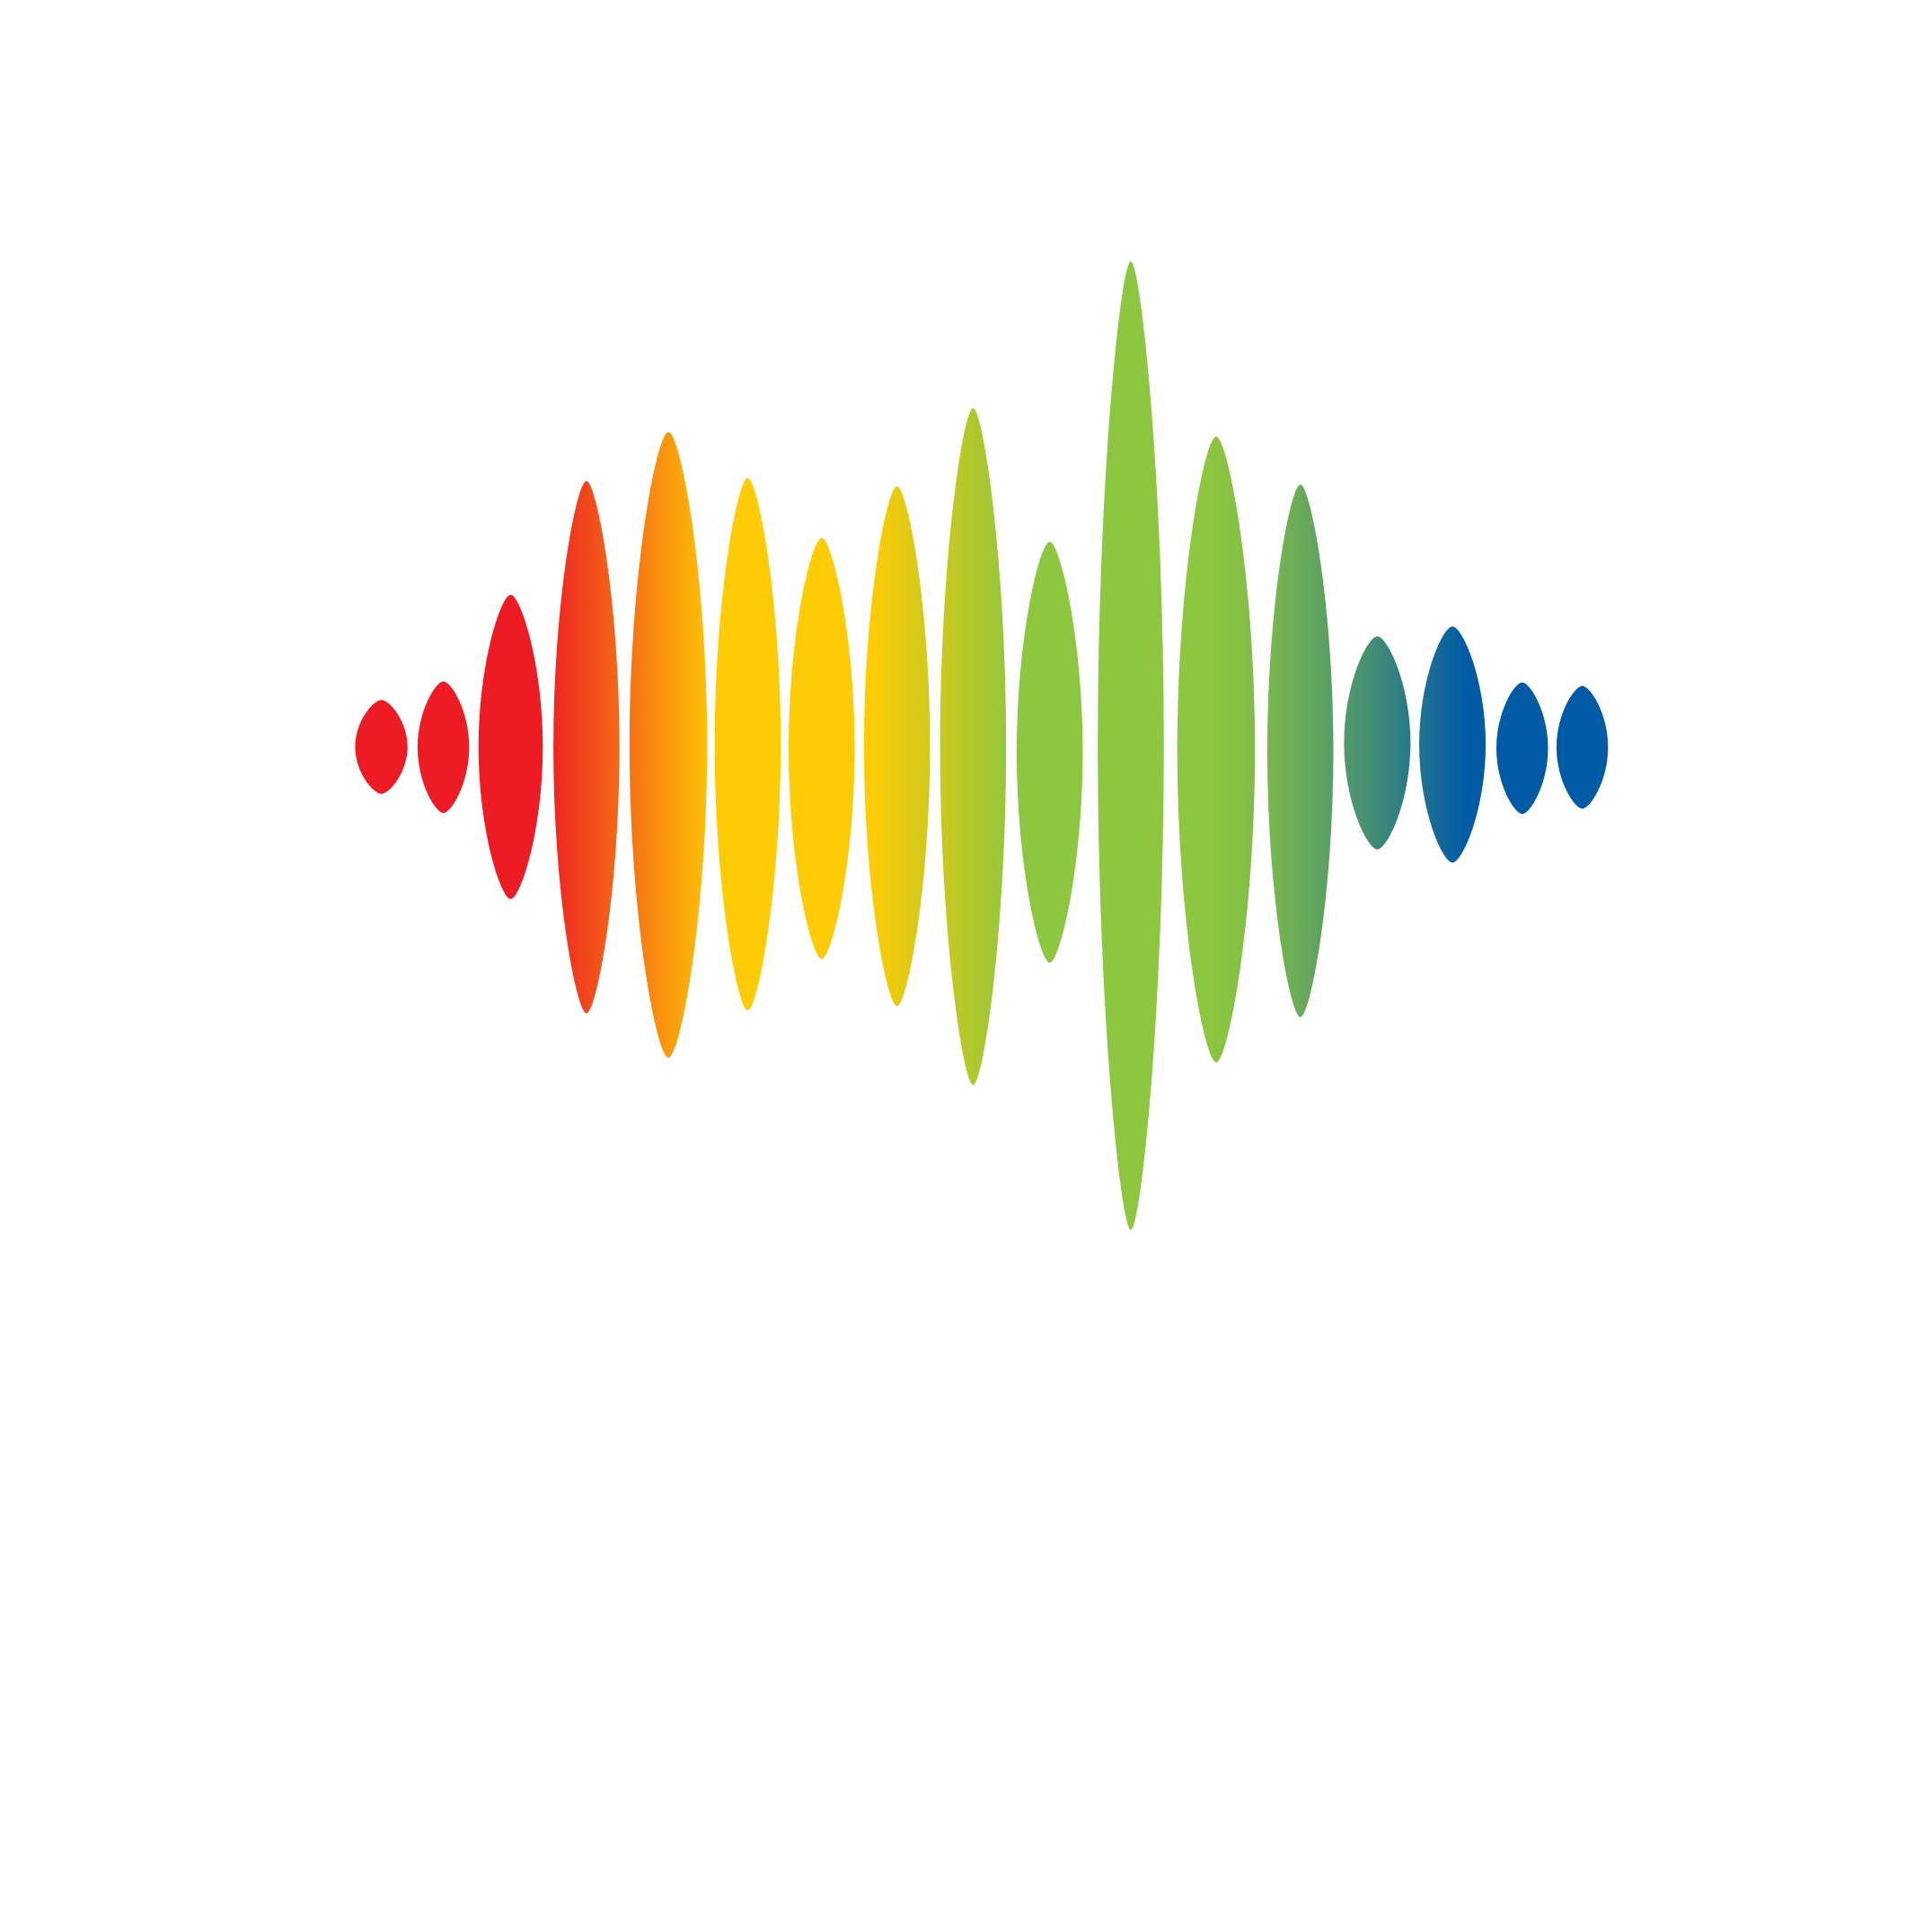 SECED_logo.png